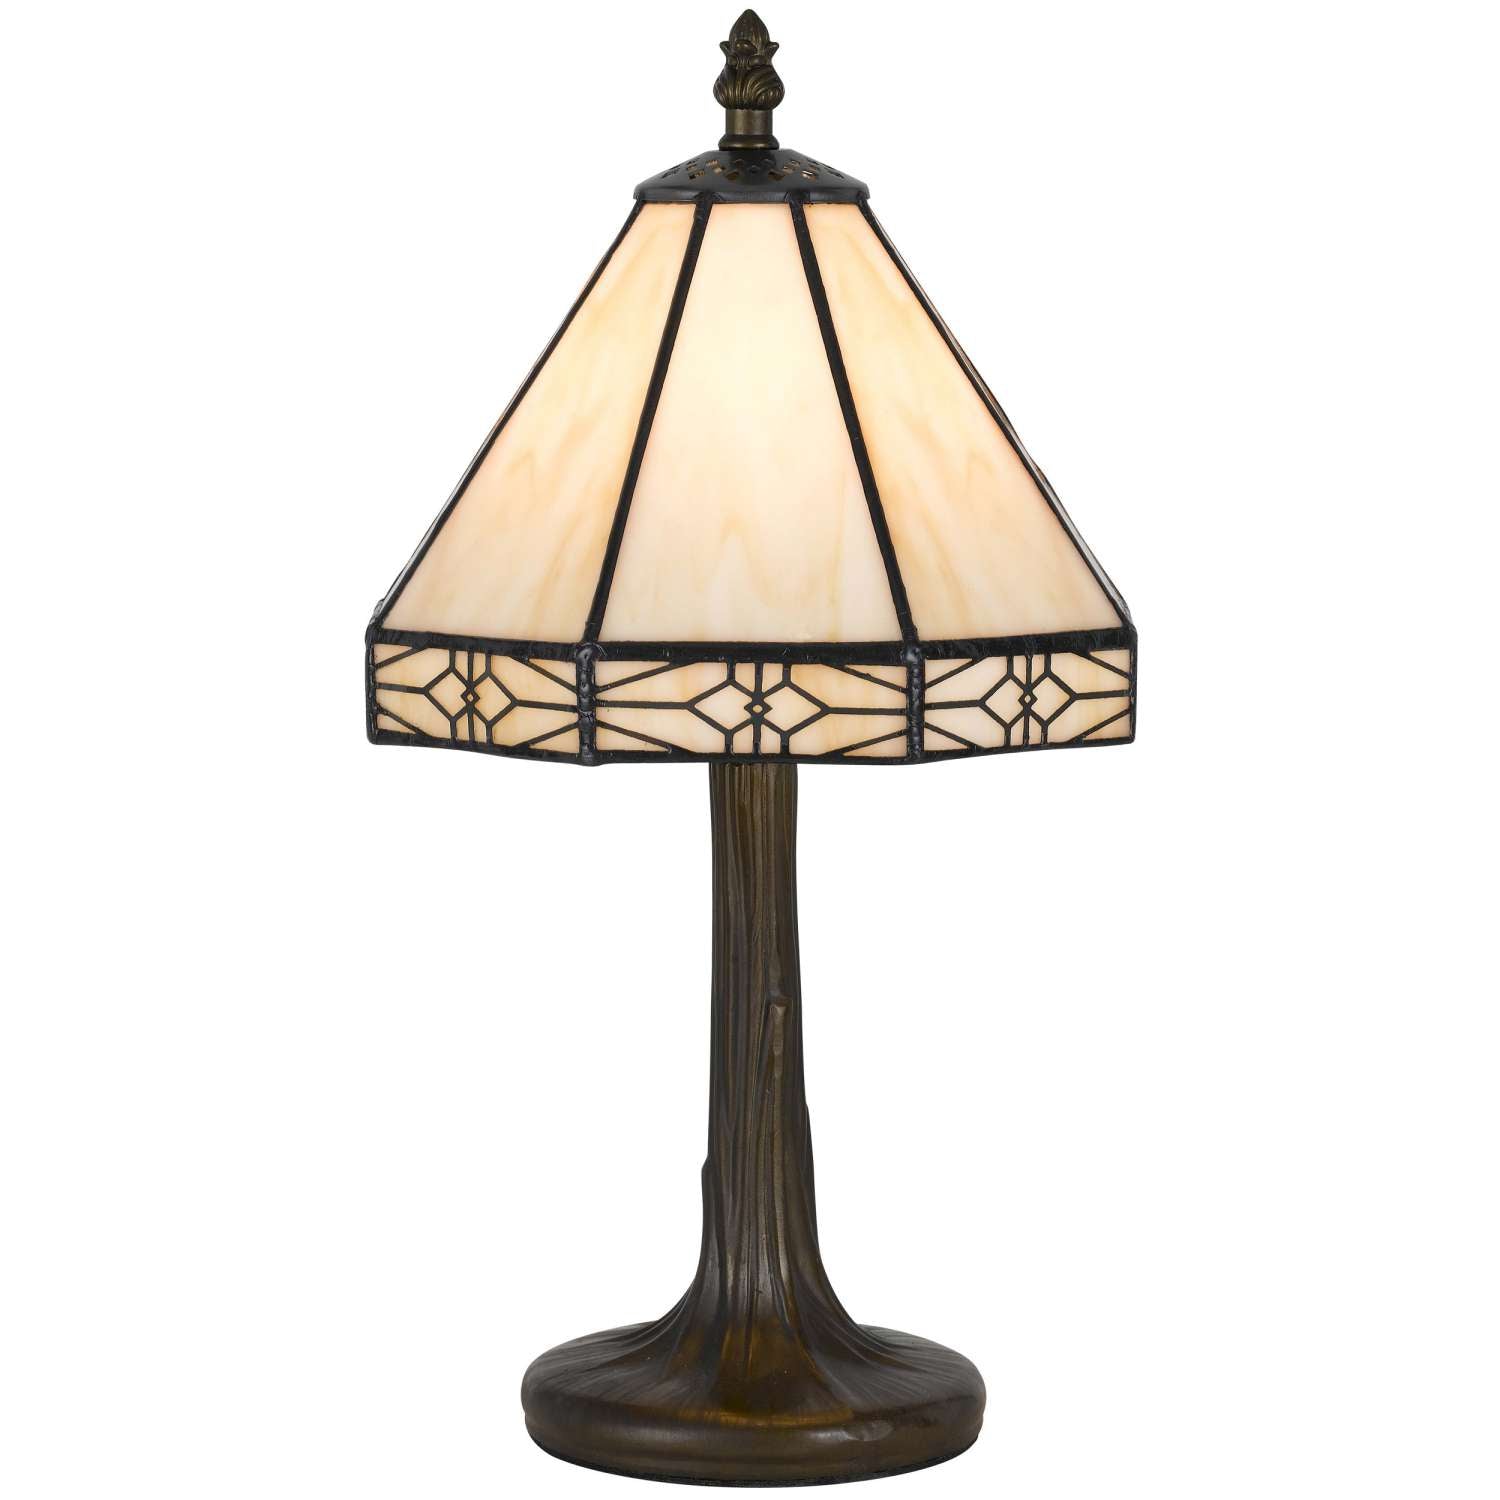 Tree Like Metal Body Tiffany Table Lamp With Conical Shade,Beige And Bronze By Benzara